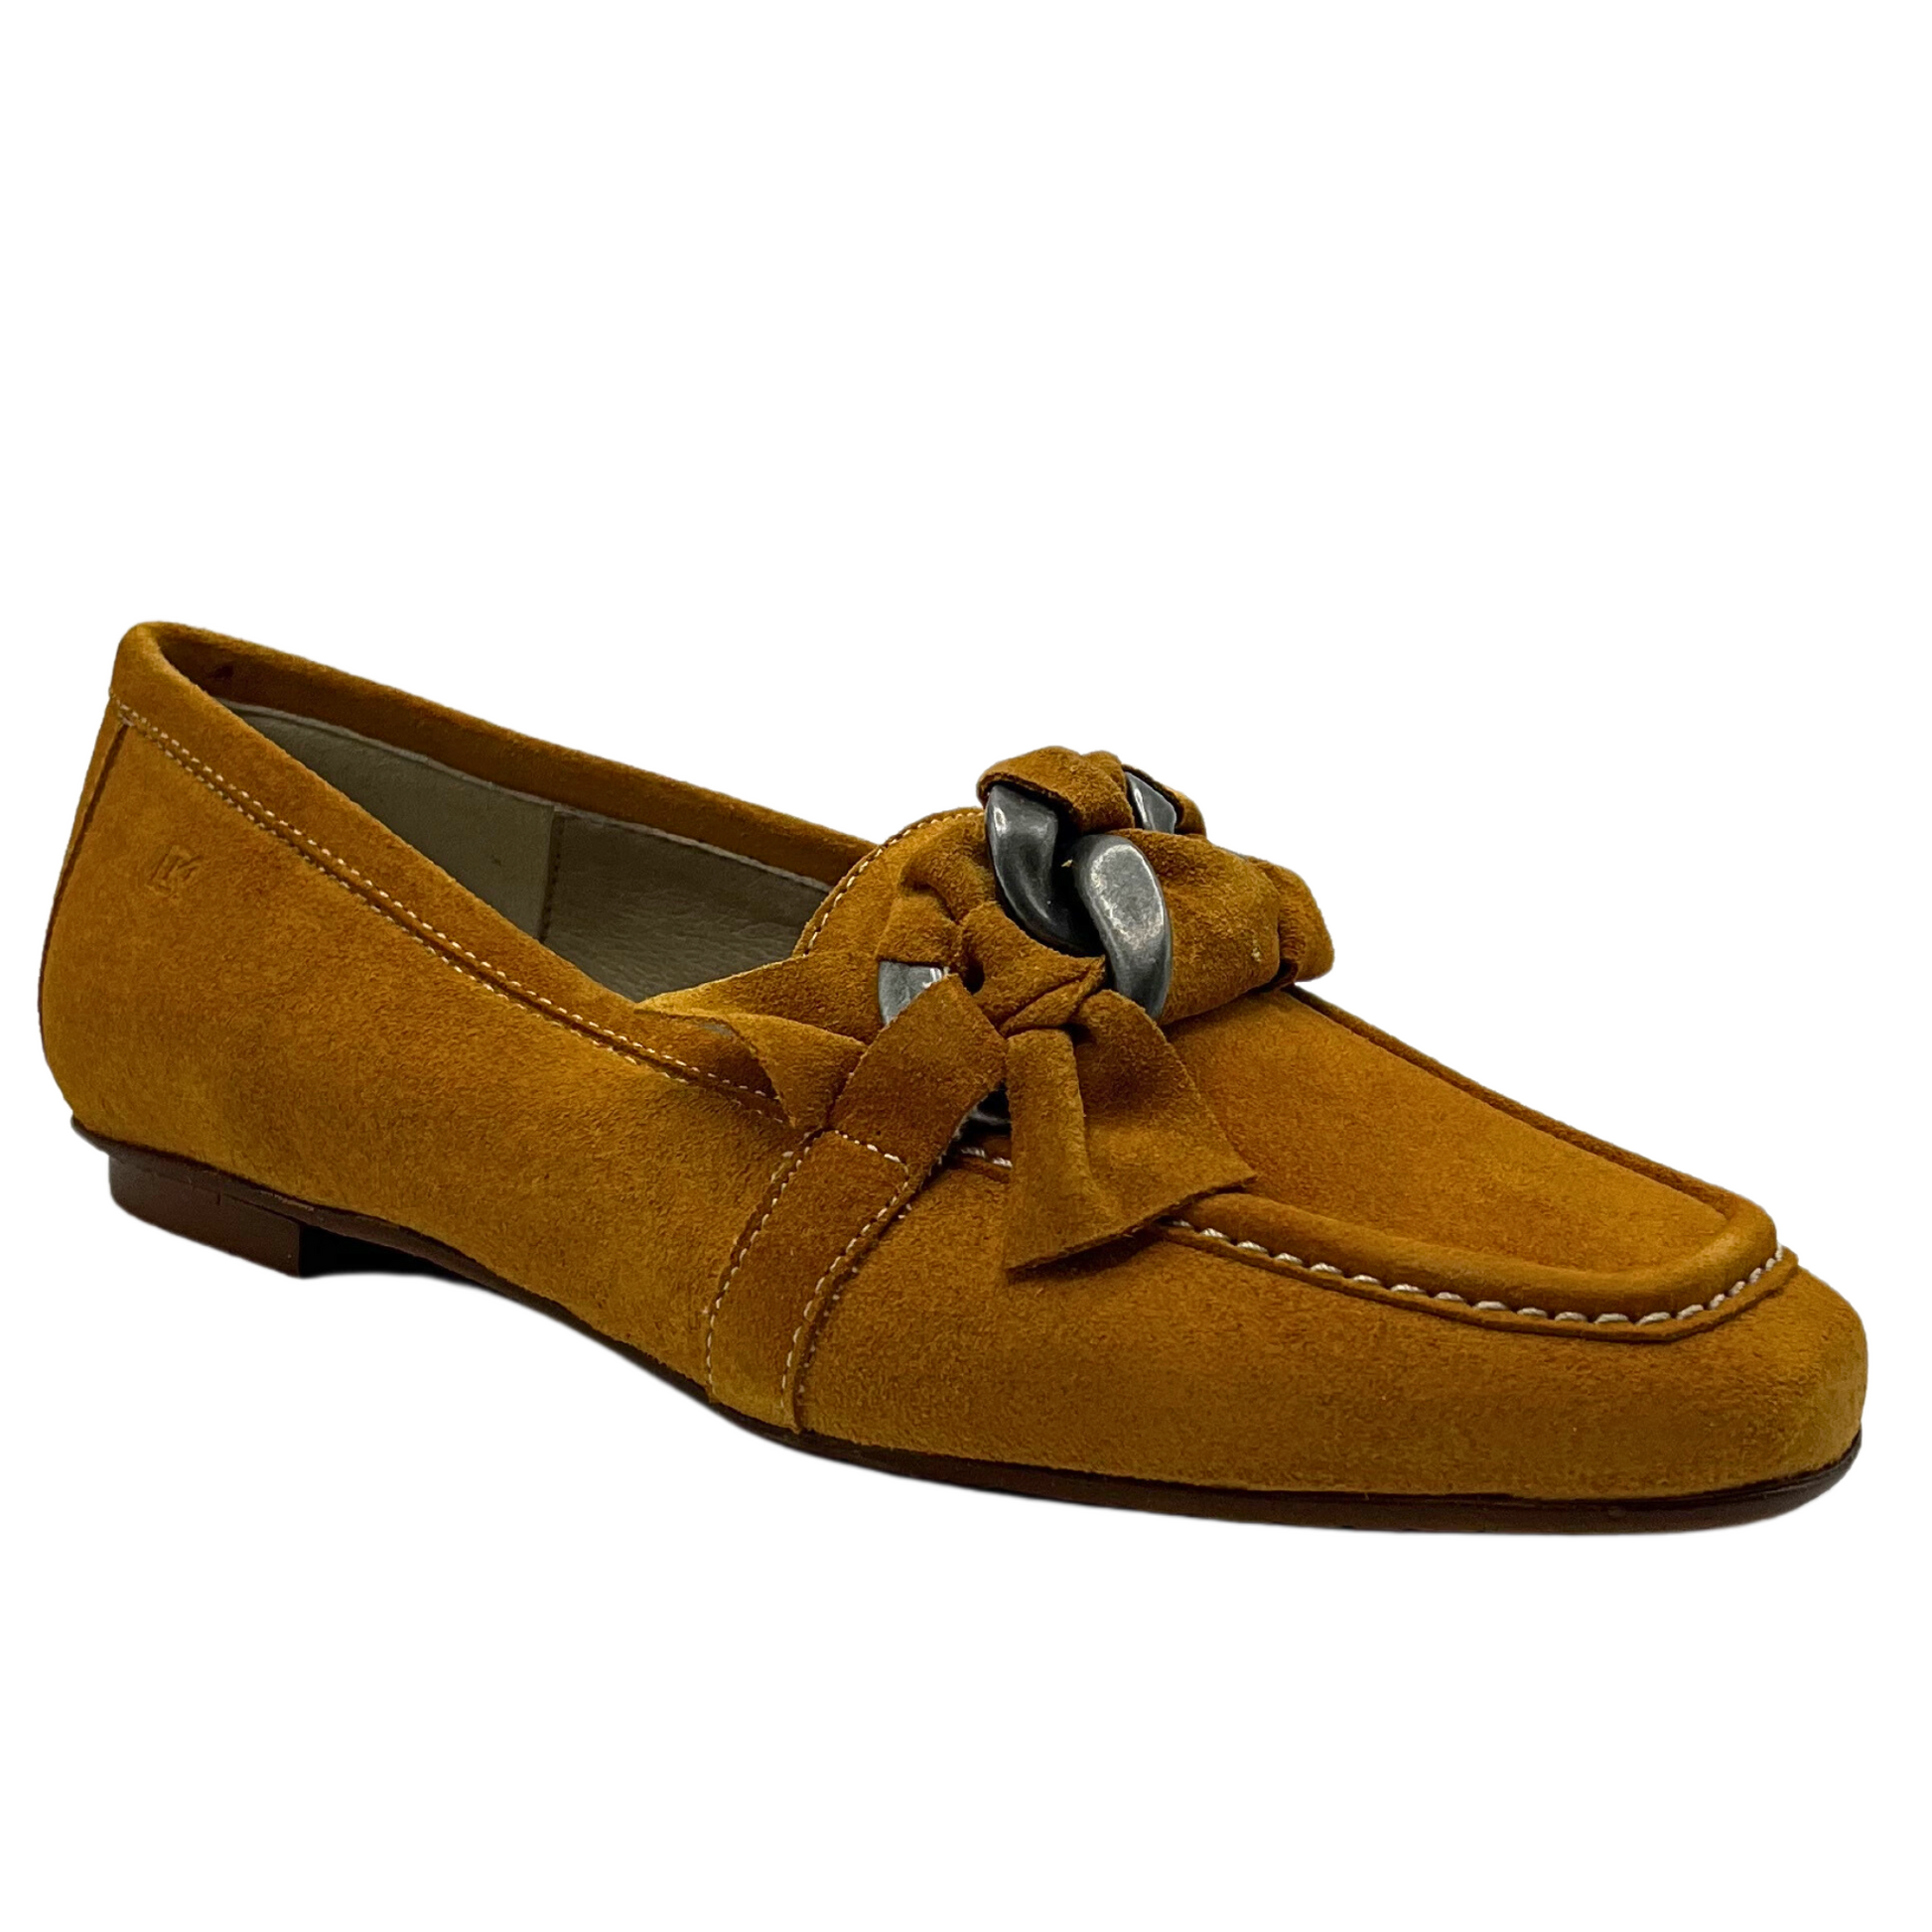 Angled side view of a moccasin style loafer done in a mustard suede.  Contrasting white stitching and knotted detail across teh top